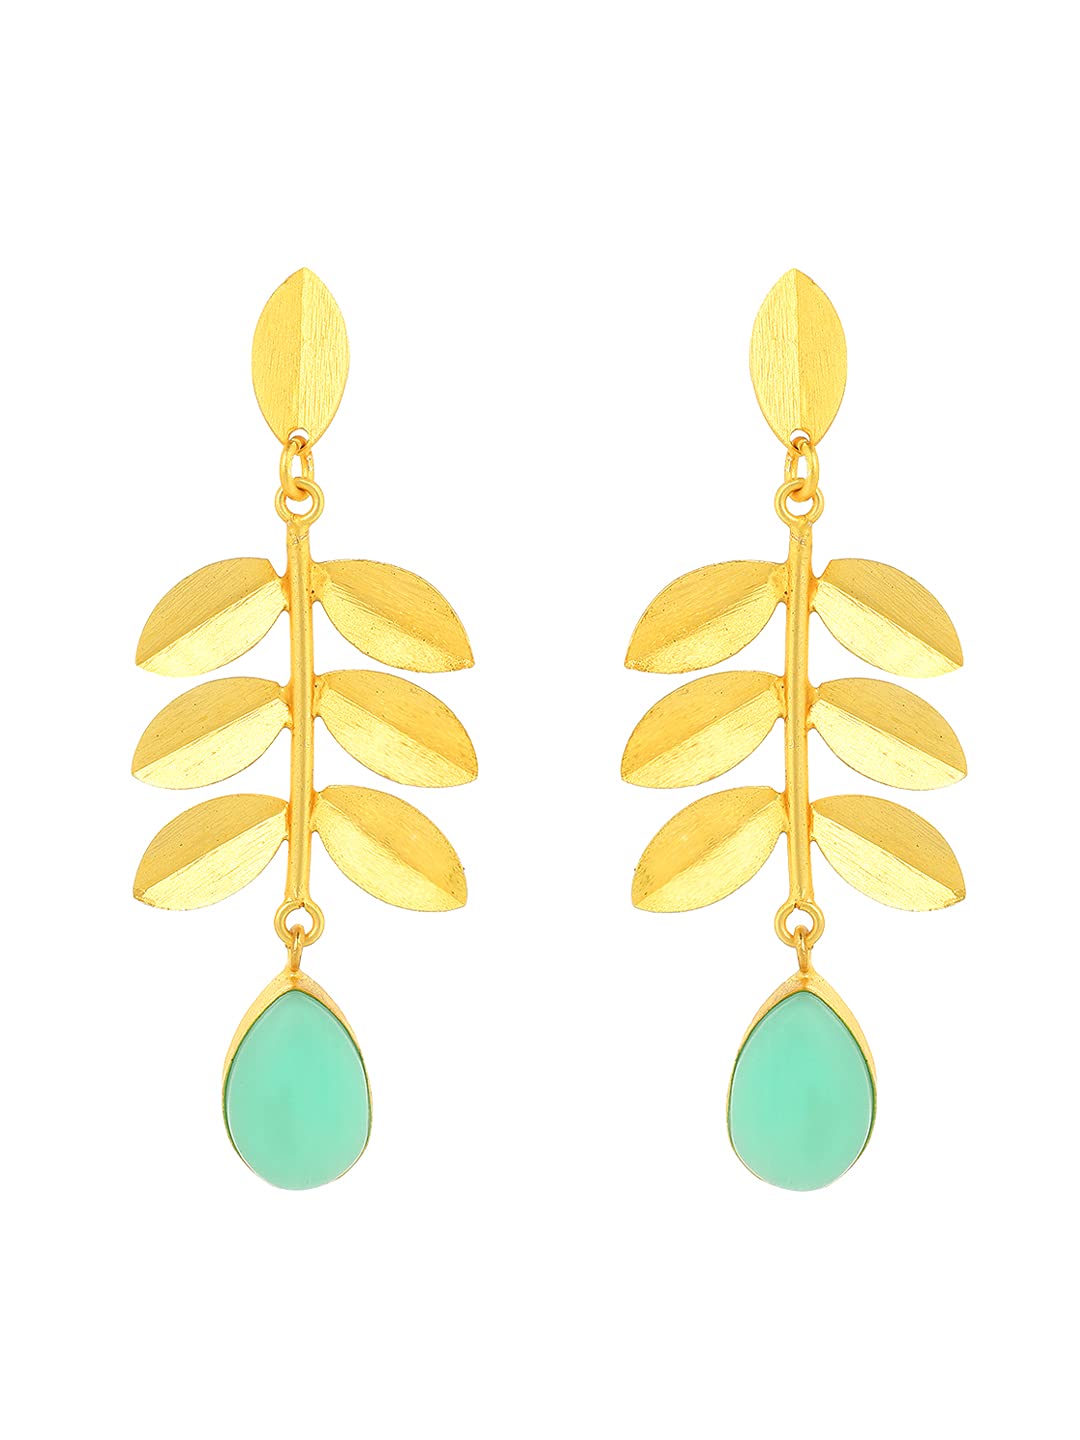 Yellow Chimes Earrings for Women Ethnic Gold Plated Traditional Leaf Design Dangler Earrings for Women and Girls